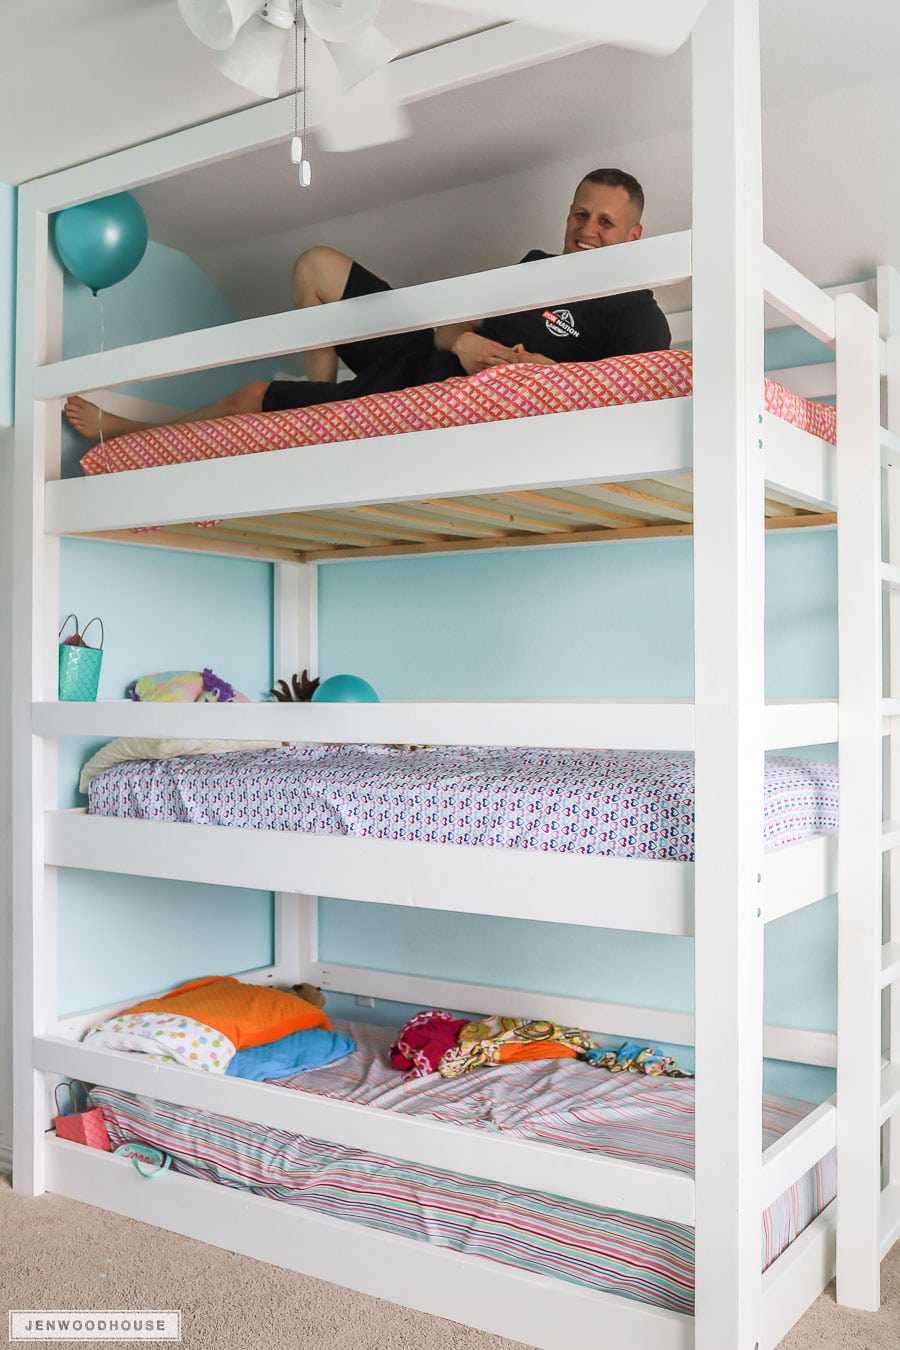 How To Build A Diy Triple Bunk Bed, Bunk Beds For Triplets